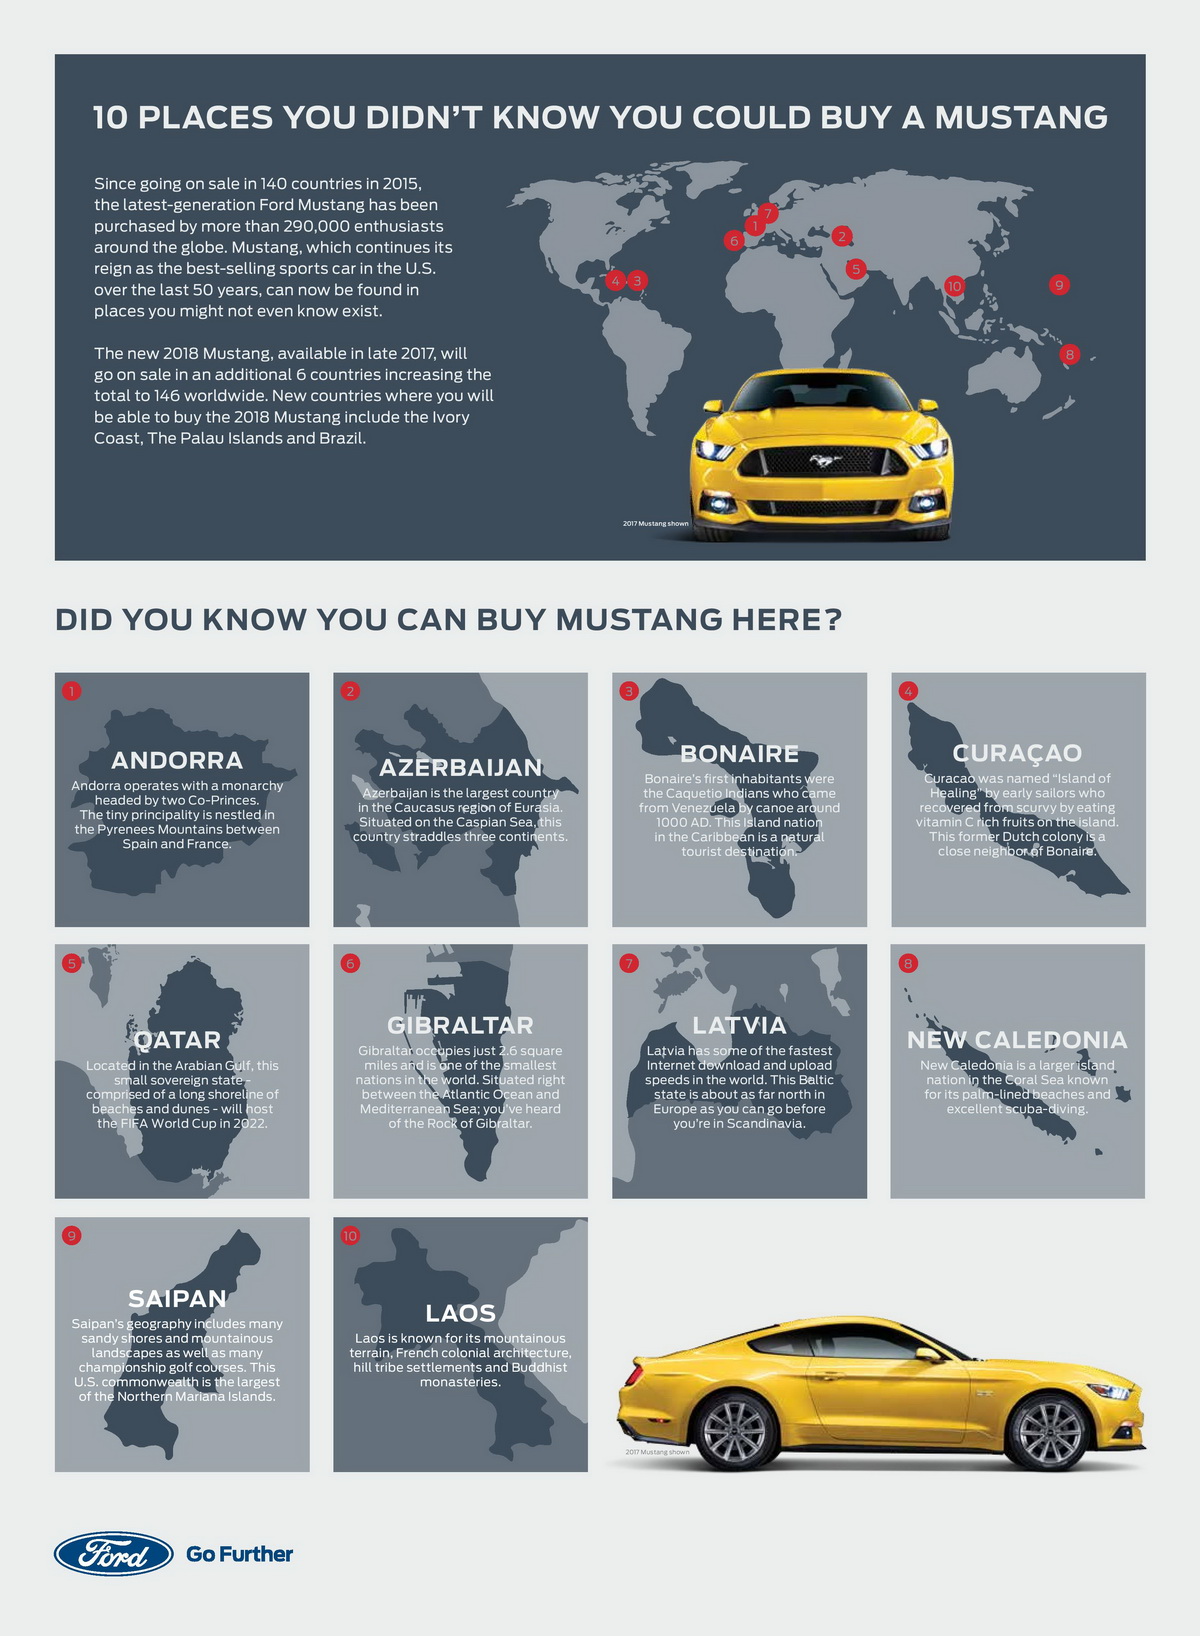 10-Places-You-Didnt-Know-You-Could-Buy-A -Mustang.jpg